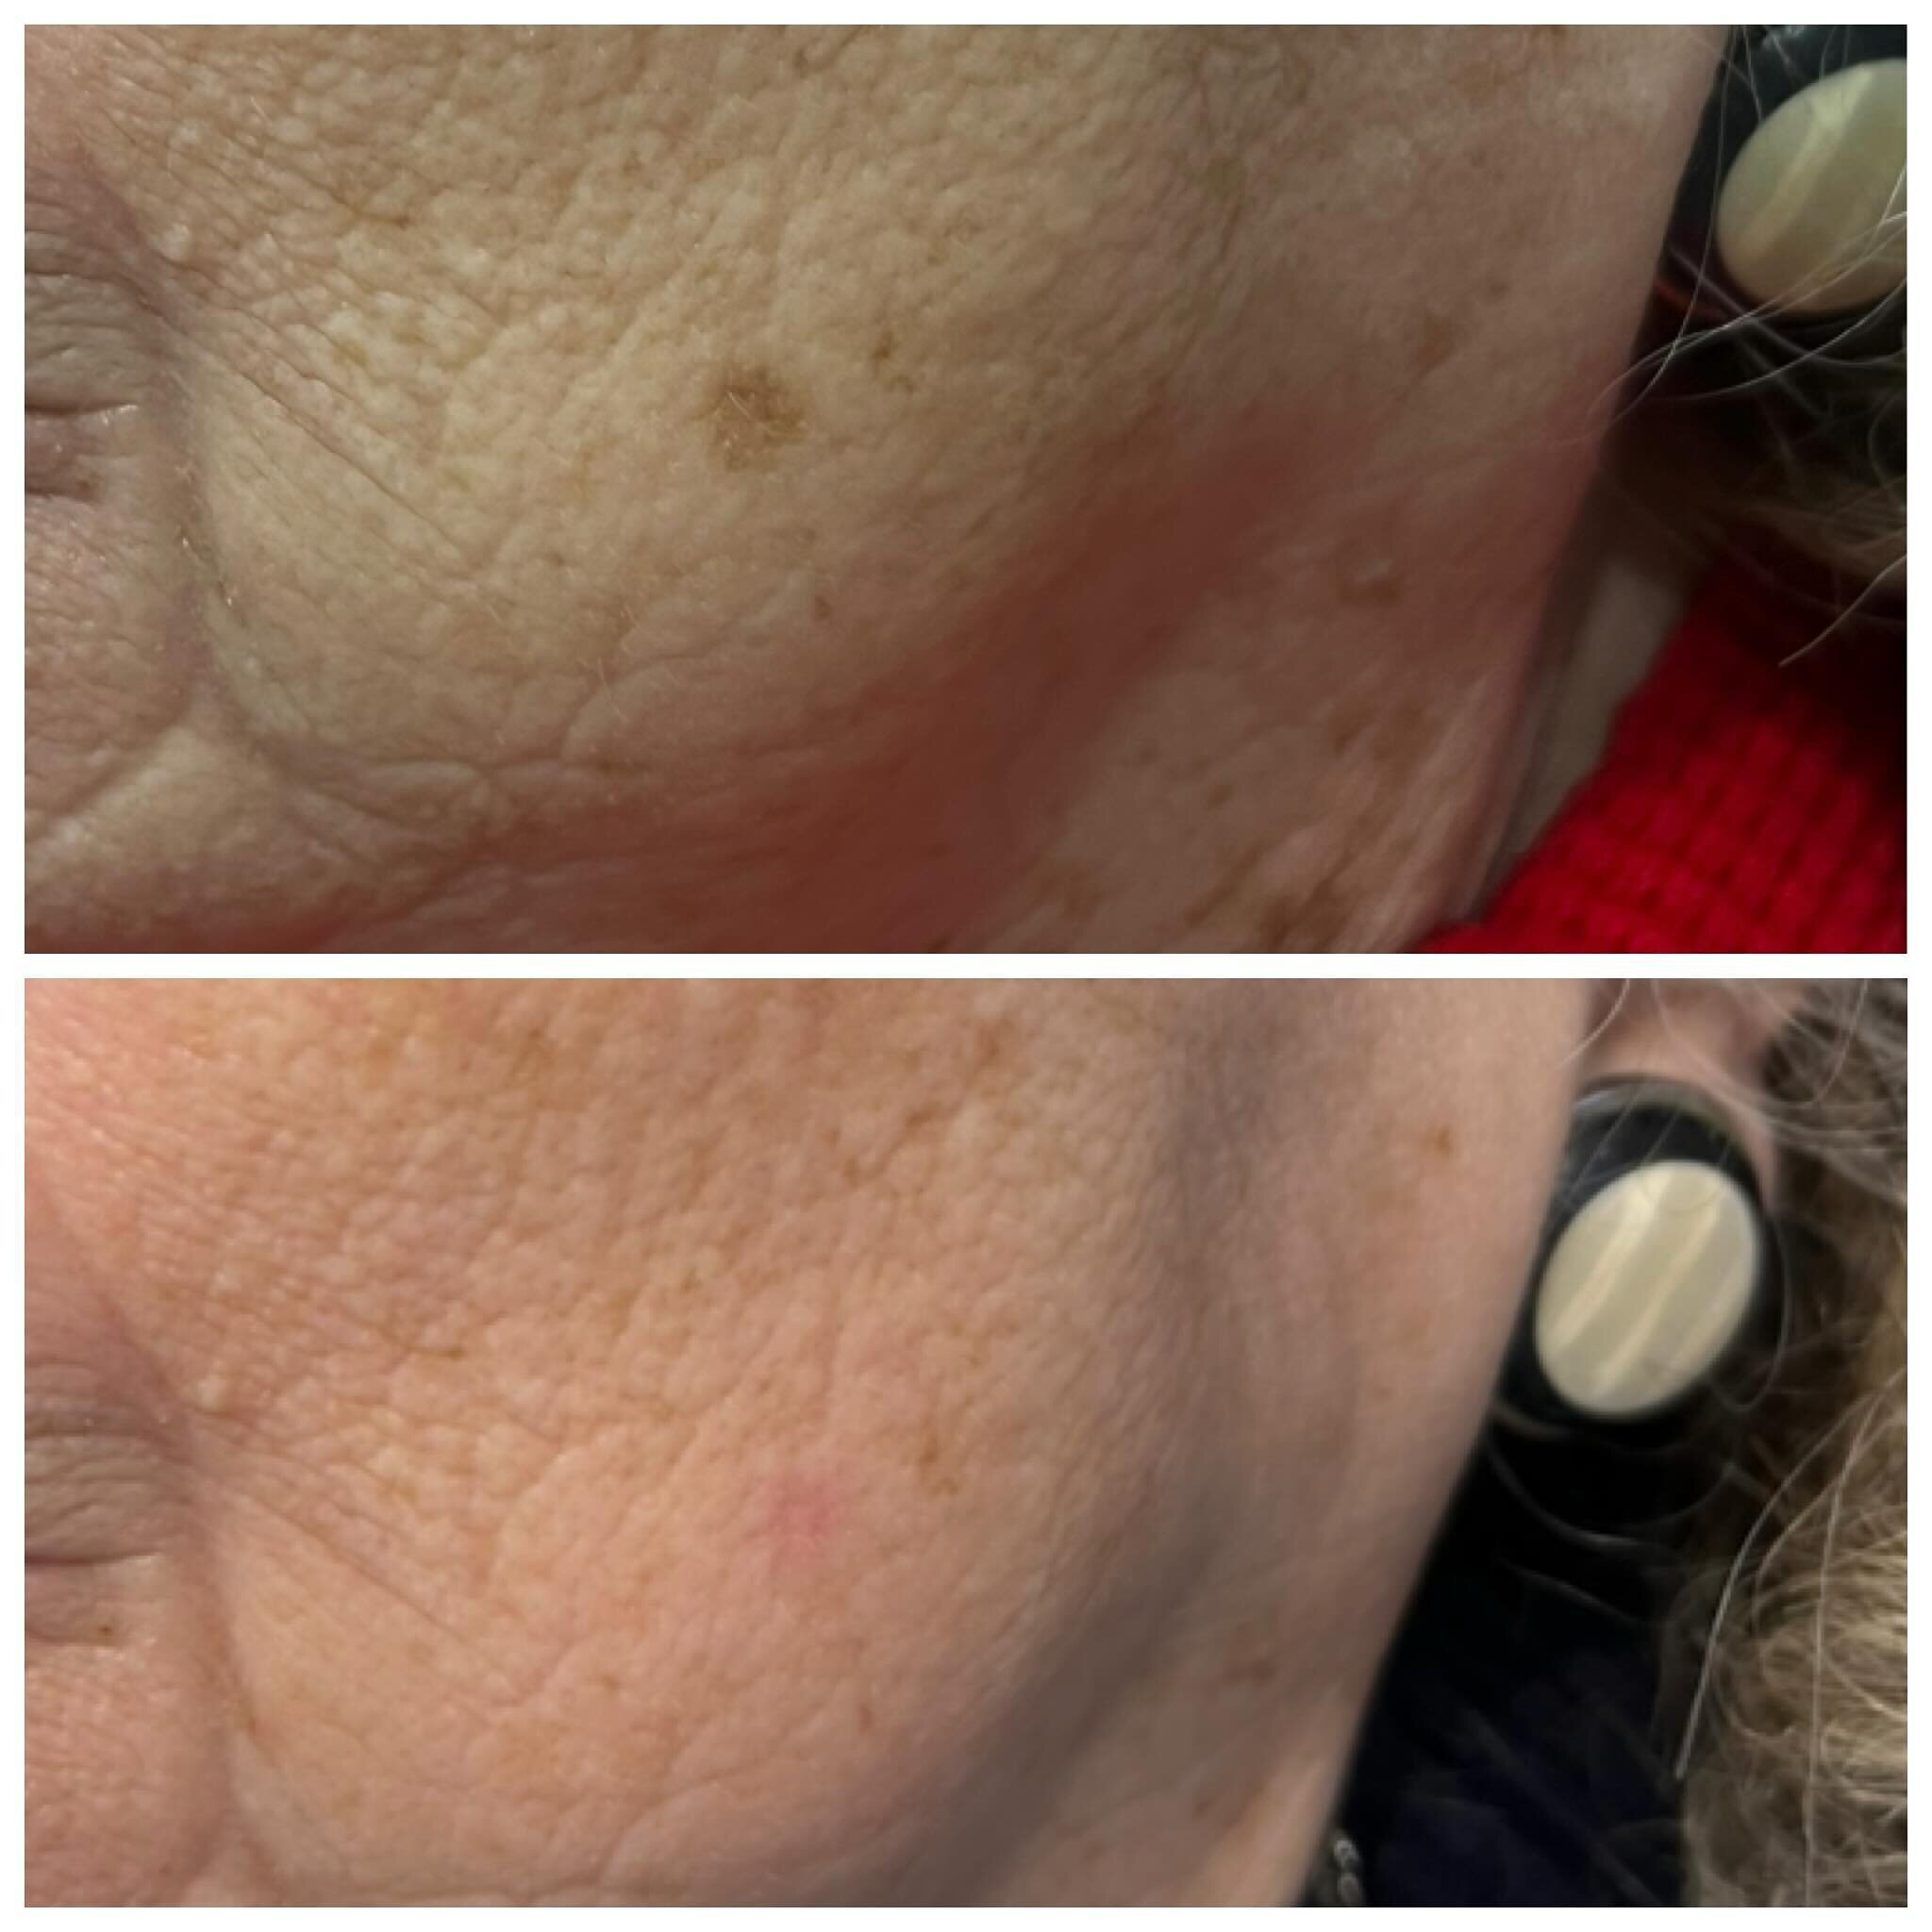 Now you see it - now you don&rsquo;t 
&mdash;&mdash;&mdash;&mdash;&mdash;
Even with the lighting being different on the before and after photos you can clearly see the pigmented area is gone - 2 weeks between photos 
&mdash;&mdash;&mdash;&mdash;&mdas